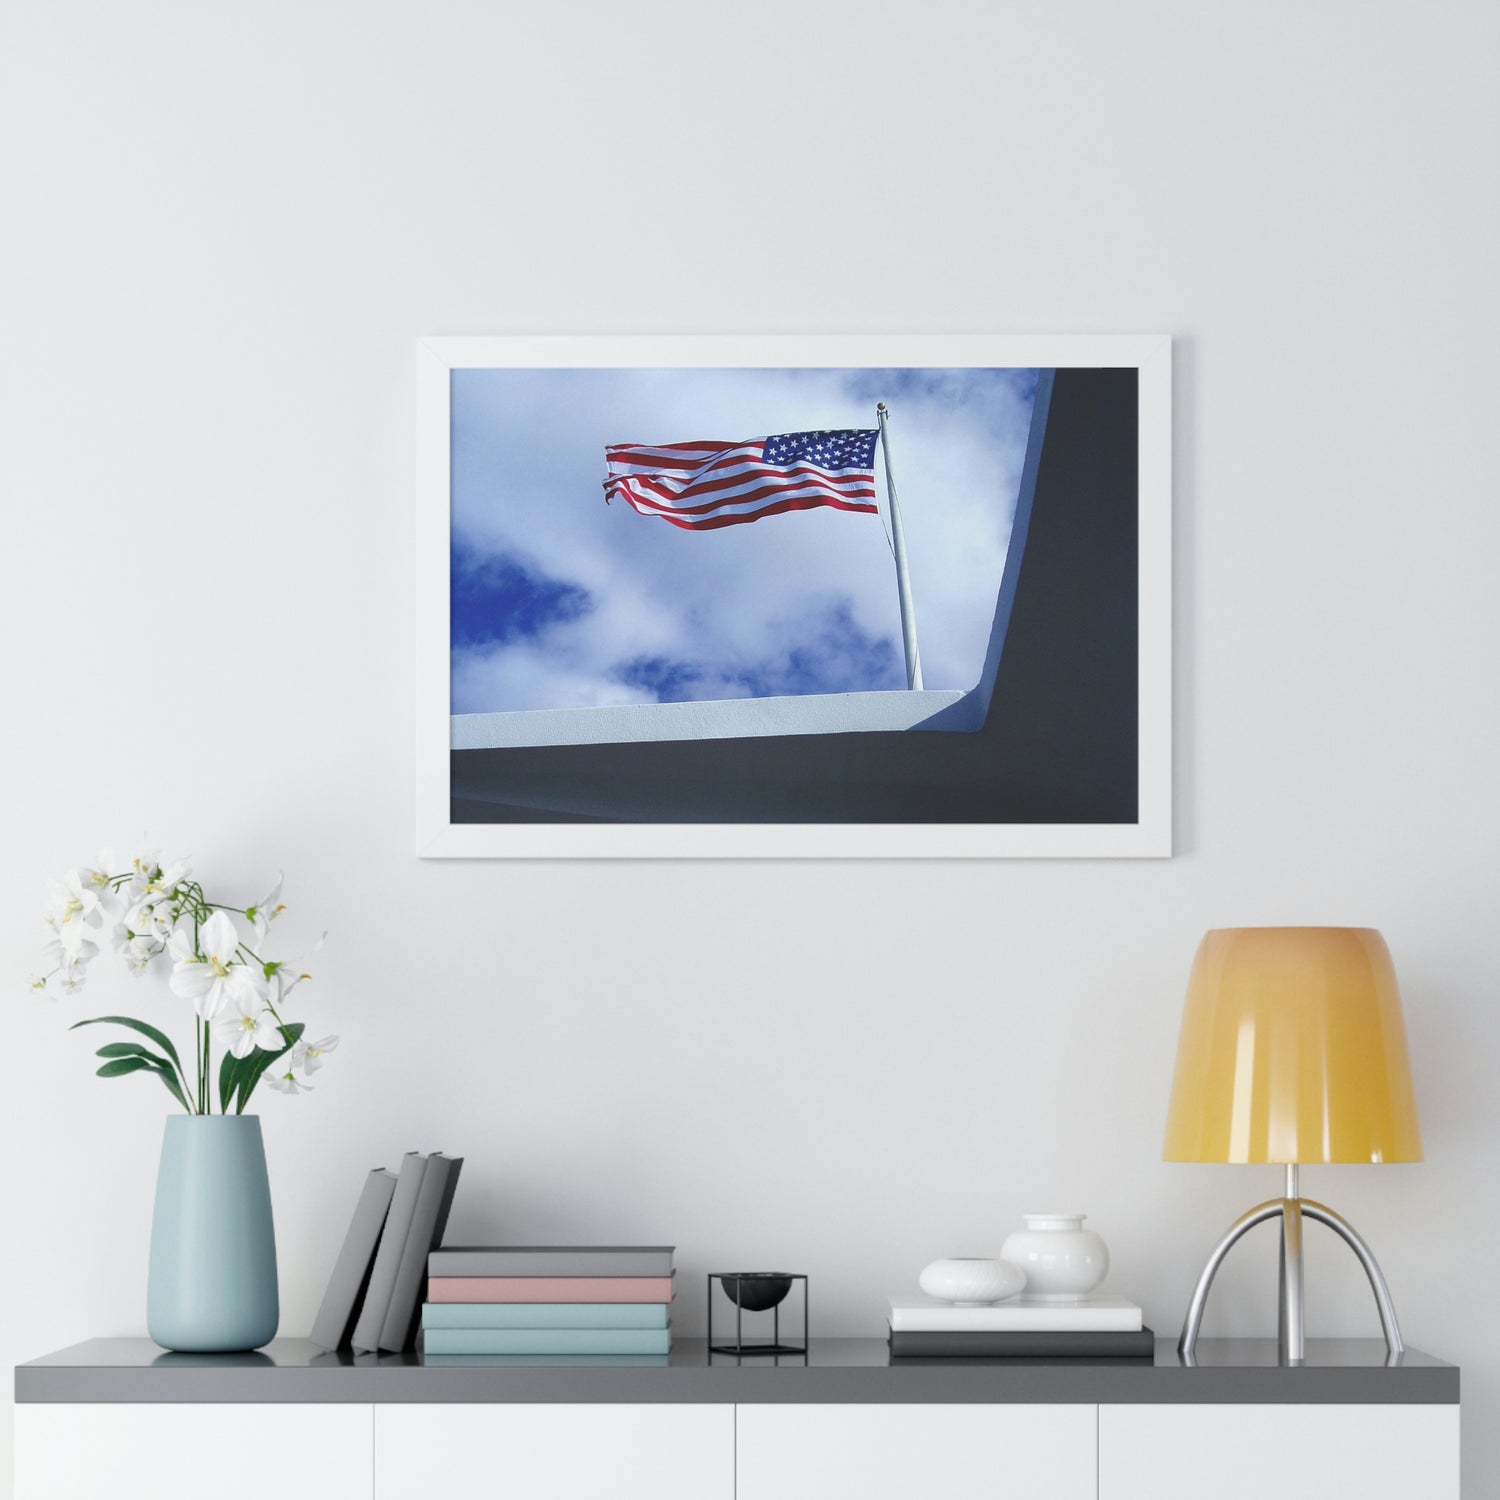 In Solemn Remembrance - Framed Horizontal Poster - Fry1Productions